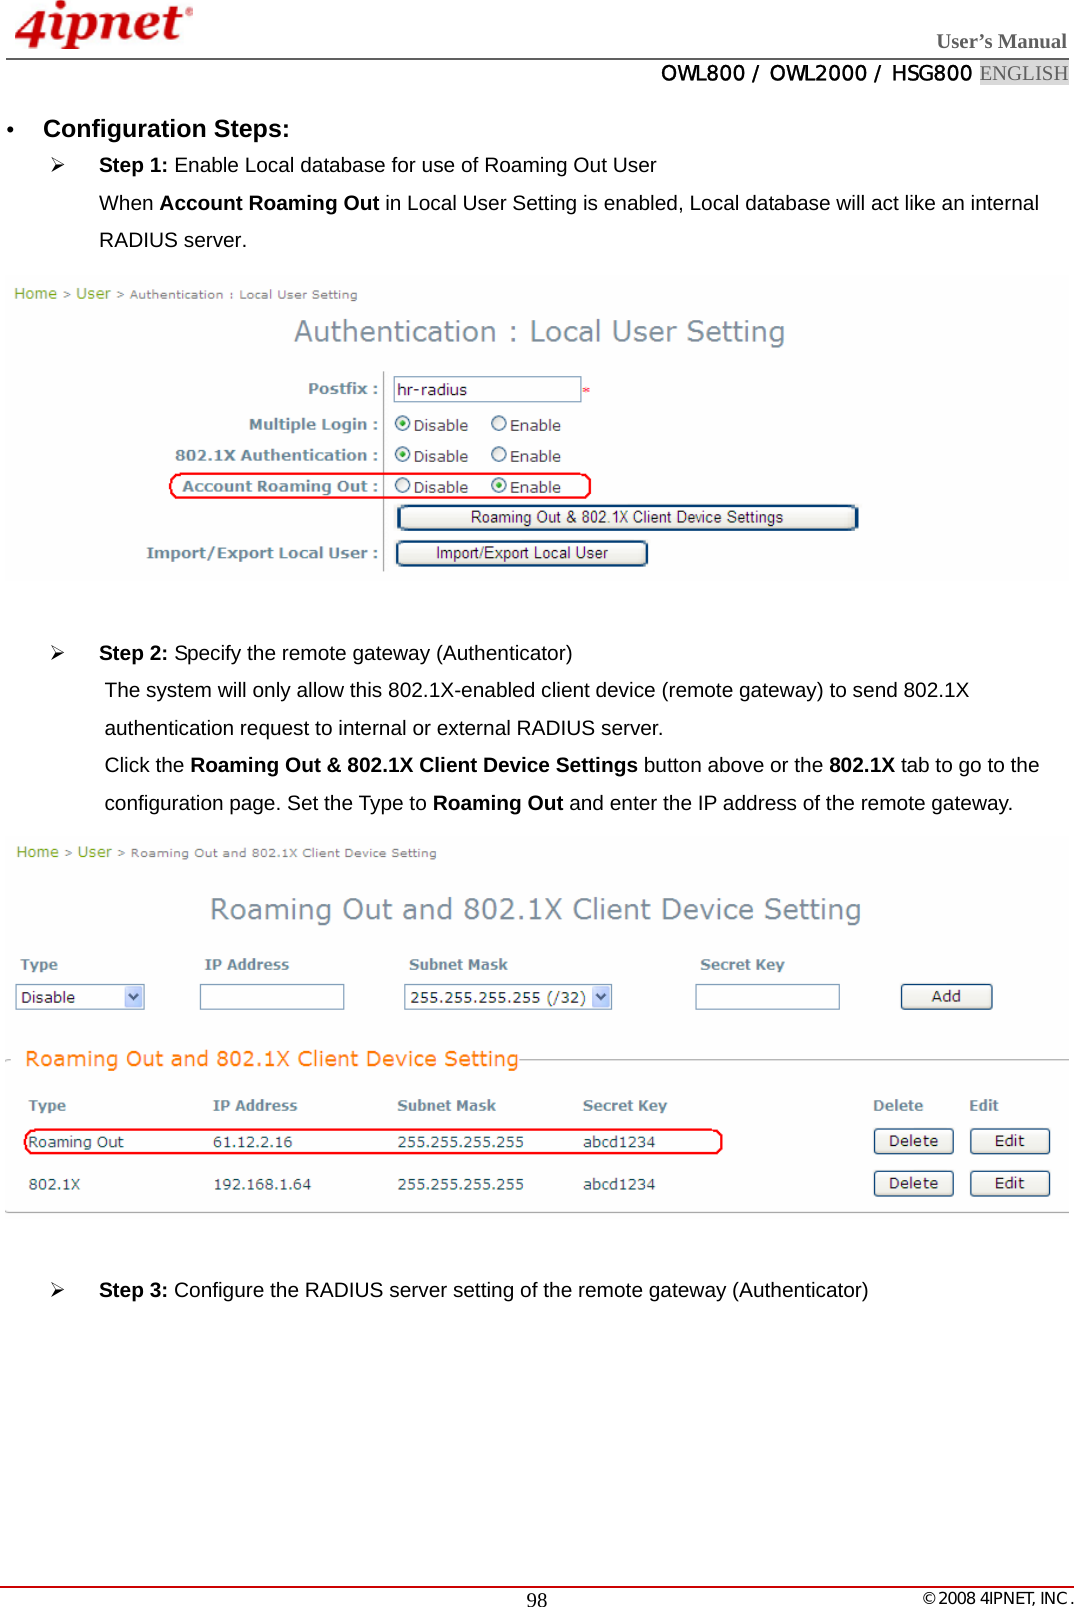  User’s Manual  OWL800 / OWL2000 / HSG800 ENGLISH   © 2008 4IPNET, INC.  98y Configuration Steps: ¾ Step 1: Enable Local database for use of Roaming Out User When Account Roaming Out in Local User Setting is enabled, Local database will act like an internal RADIUS server.   ¾ Step 2: Specify the remote gateway (Authenticator) The system will only allow this 802.1X-enabled client device (remote gateway) to send 802.1X authentication request to internal or external RADIUS server. Click the Roaming Out &amp; 802.1X Client Device Settings button above or the 802.1X tab to go to the configuration page. Set the Type to Roaming Out and enter the IP address of the remote gateway.   ¾ Step 3: Configure the RADIUS server setting of the remote gateway (Authenticator) 